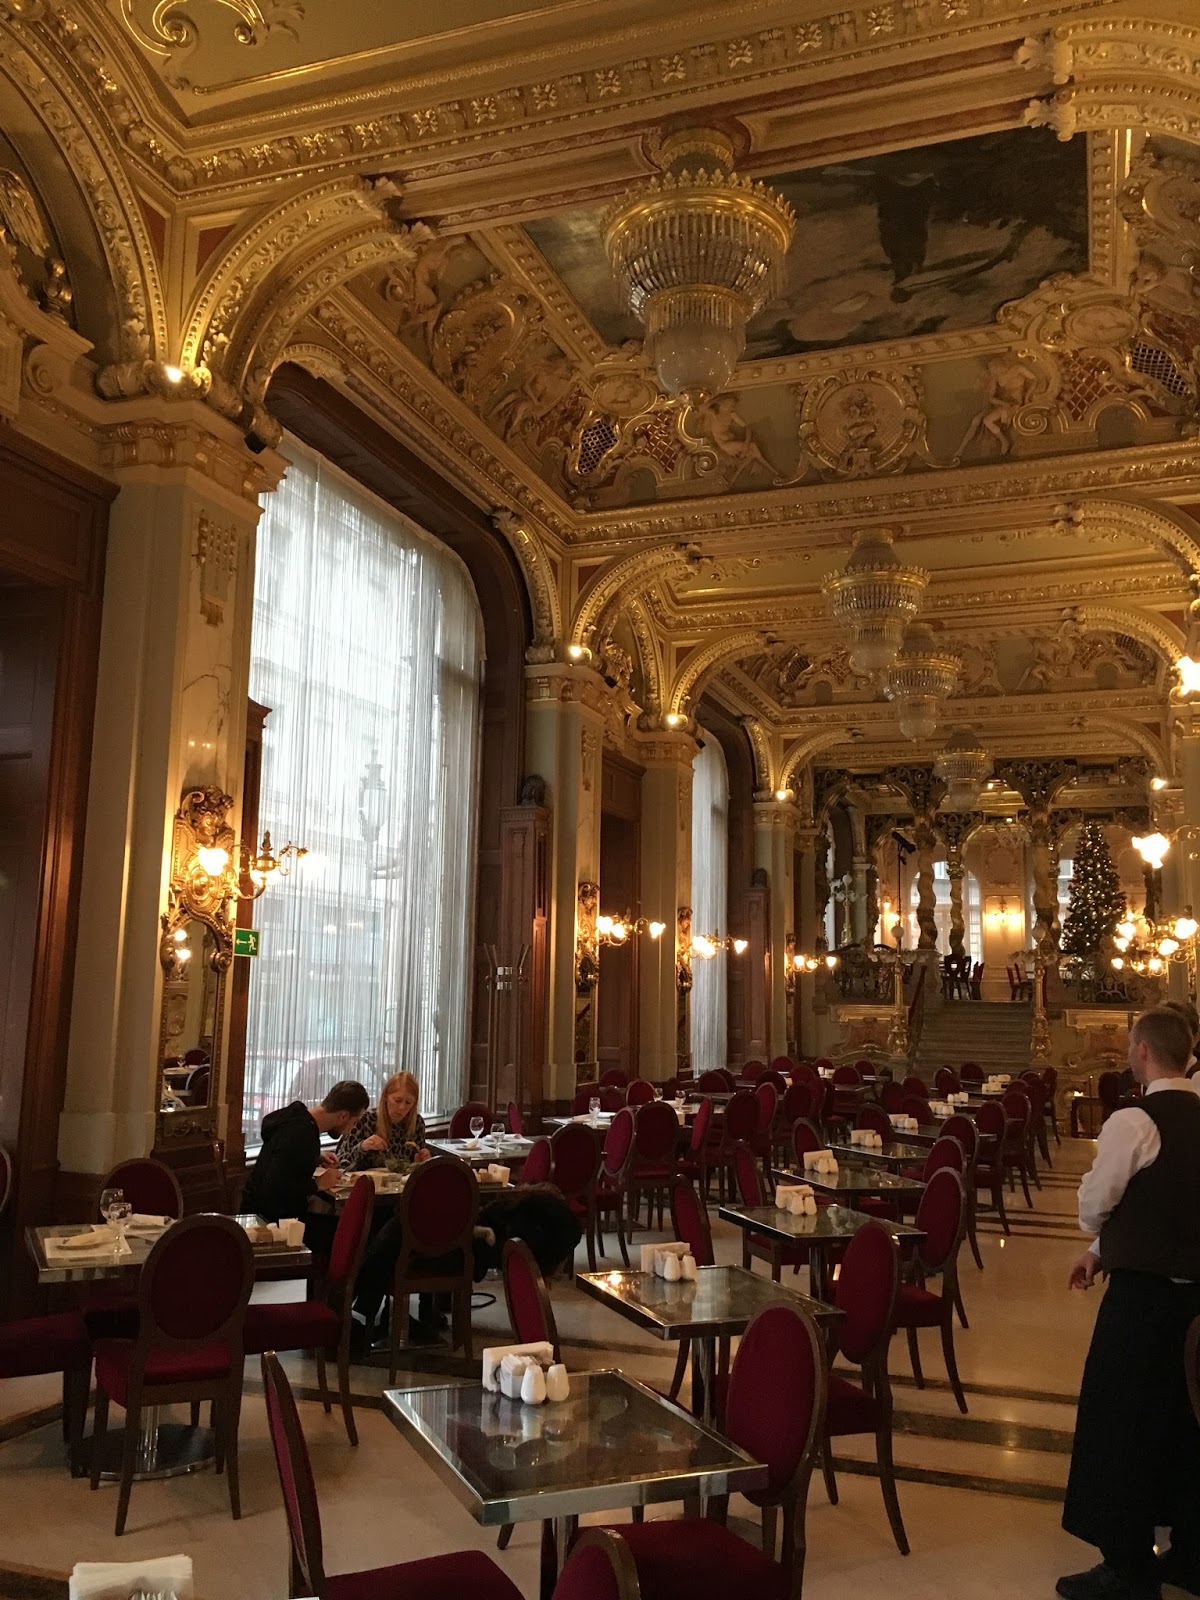 New York Cafe - Budapest, Hungary - Travel is my favorite Sport